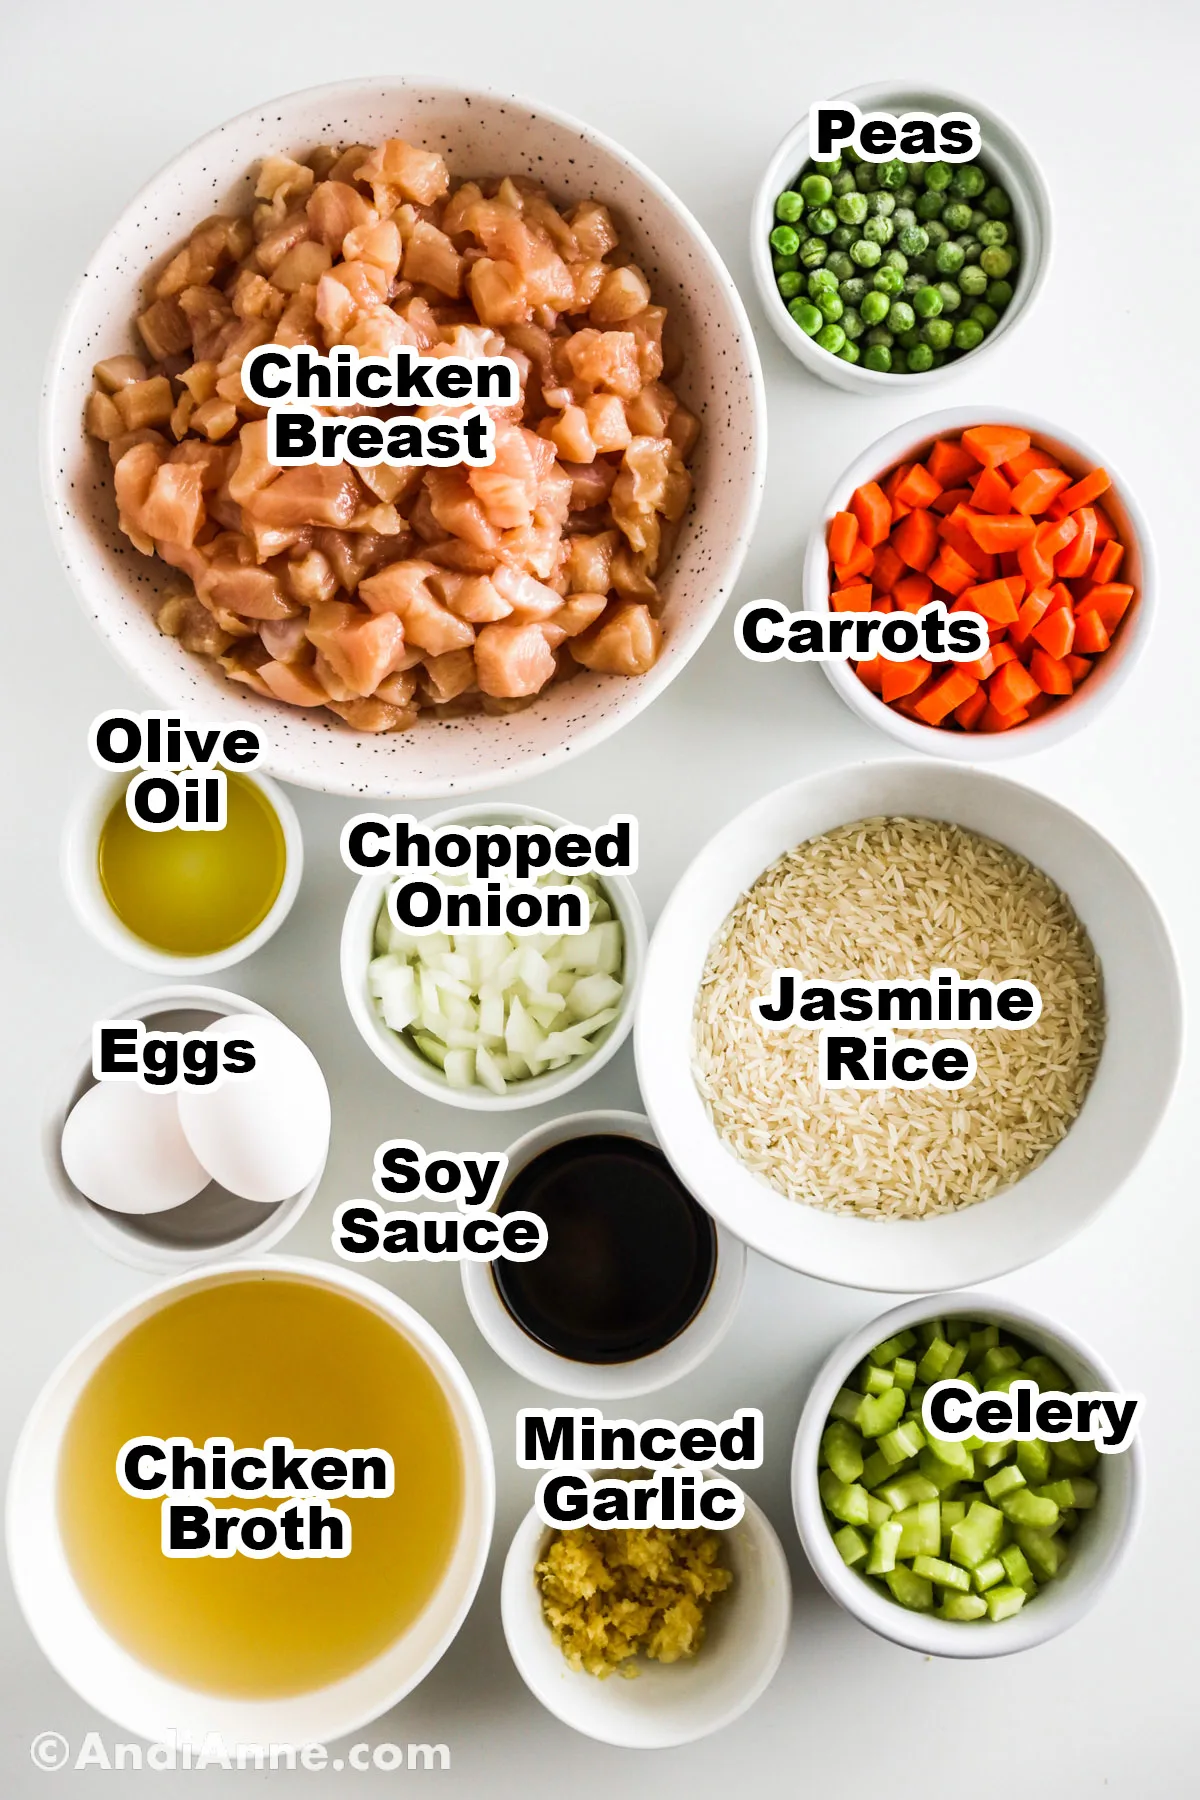 Recipe ingredients in bowls including chopped raw chicken, frozen peas, chopped carrots, olive oil, onion, jasmine rice, eggs, soy sauce, chicken broth, garlic and celery.